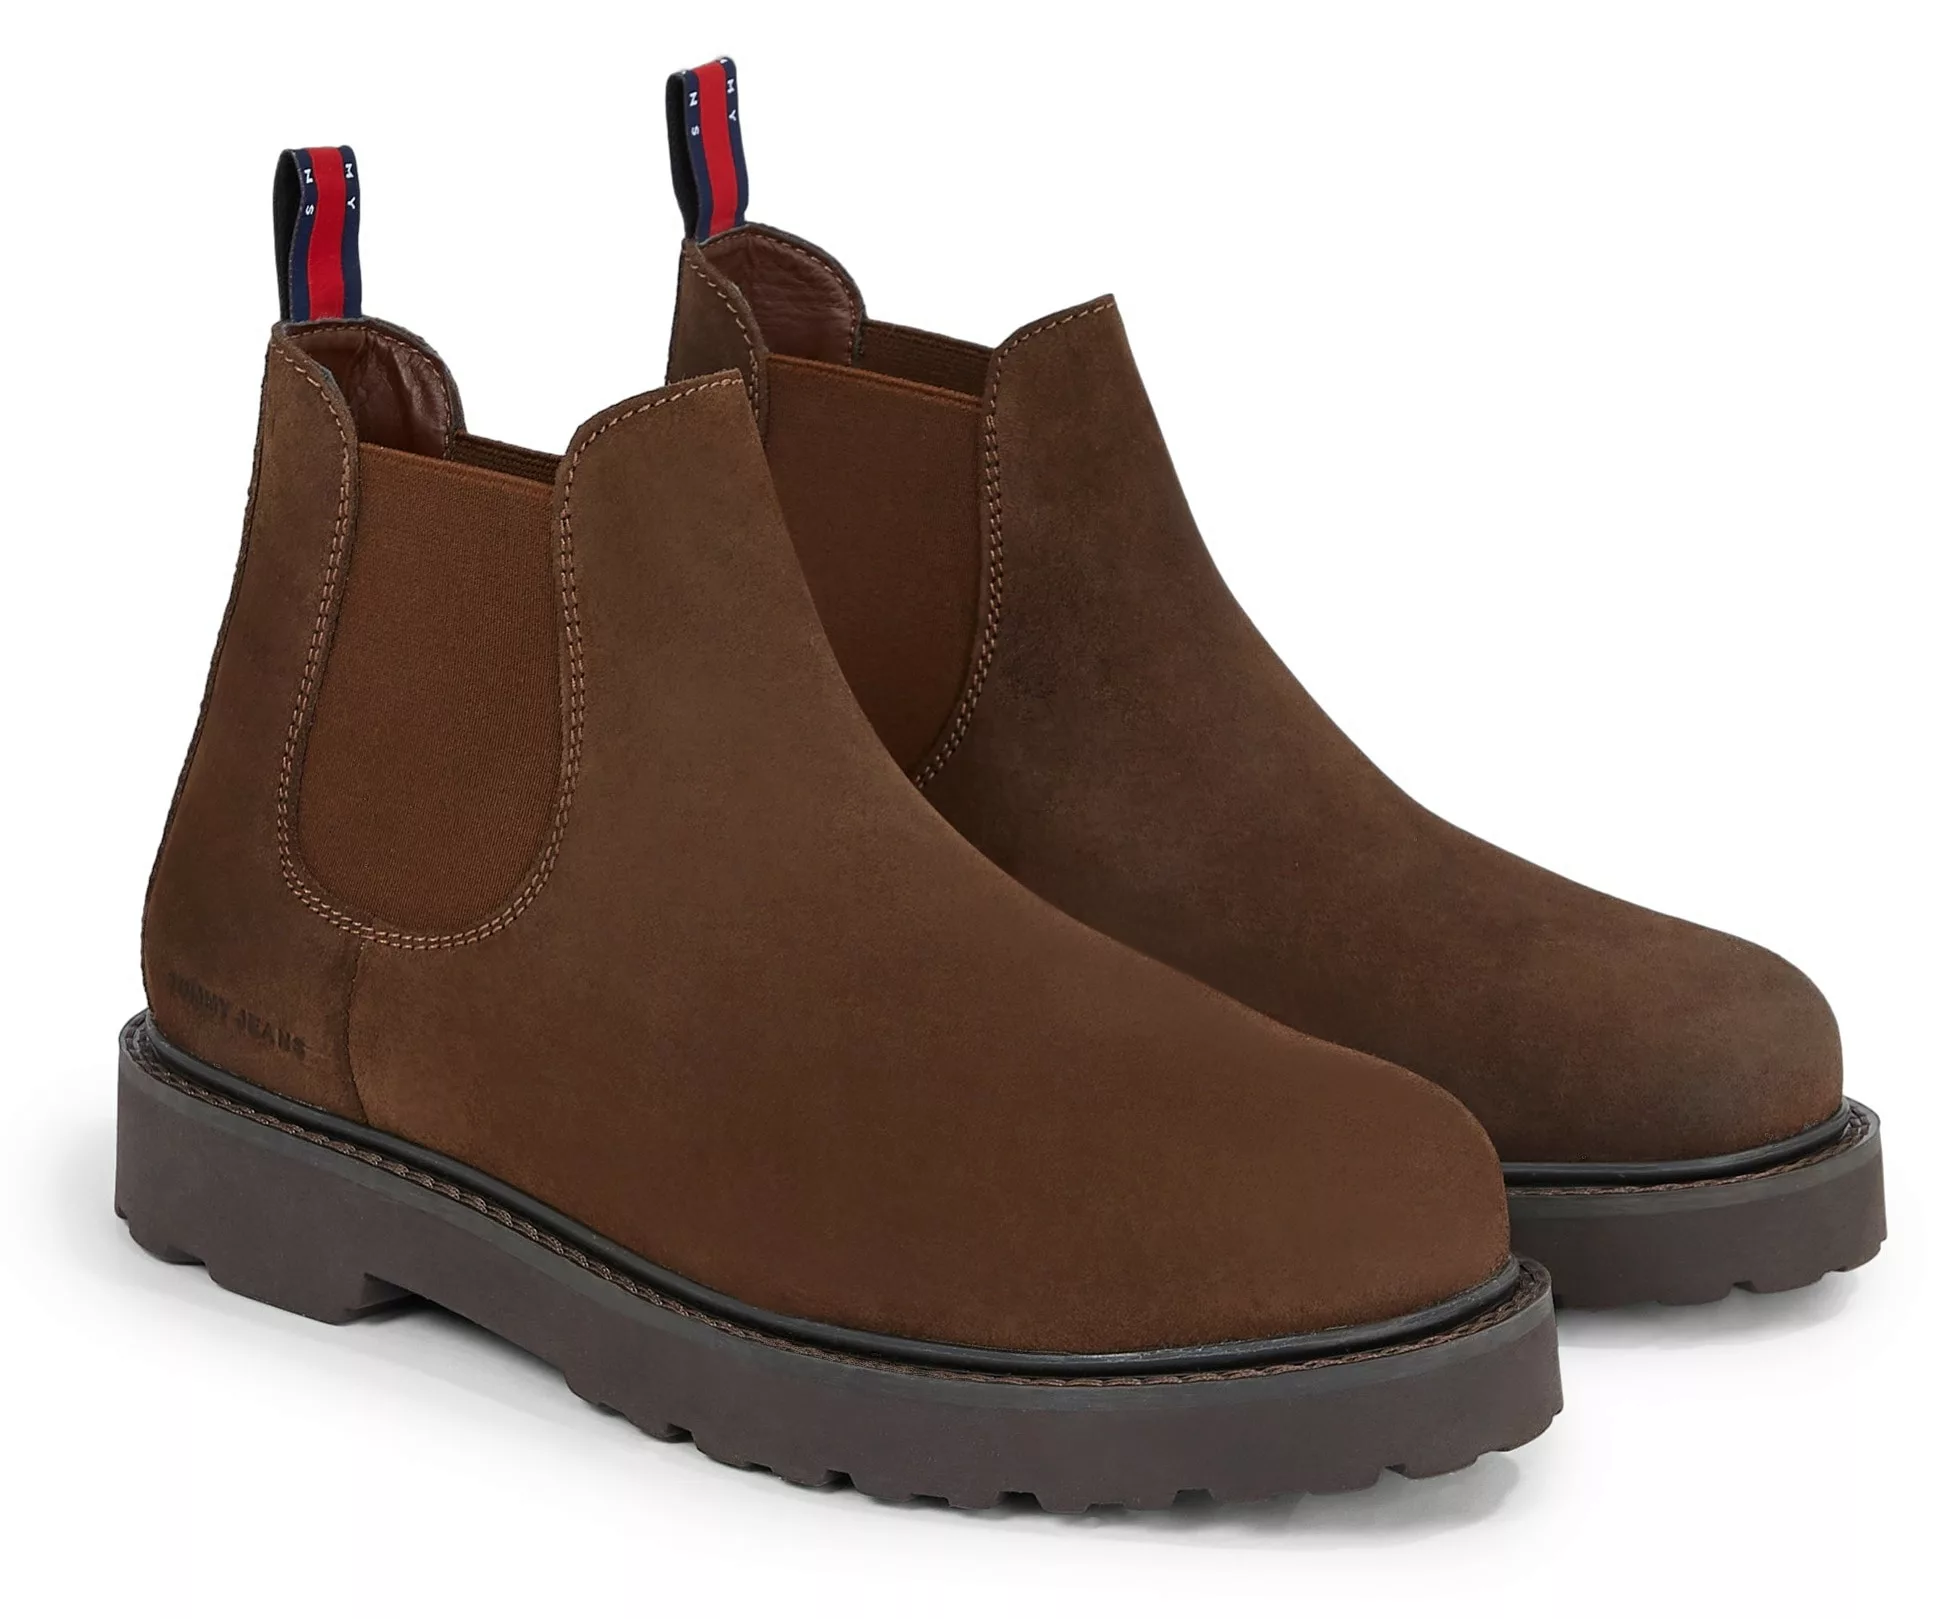 Tommy Jeans Chelseaboots "TOMMY JEANS SUEDE BOOT" günstig online kaufen